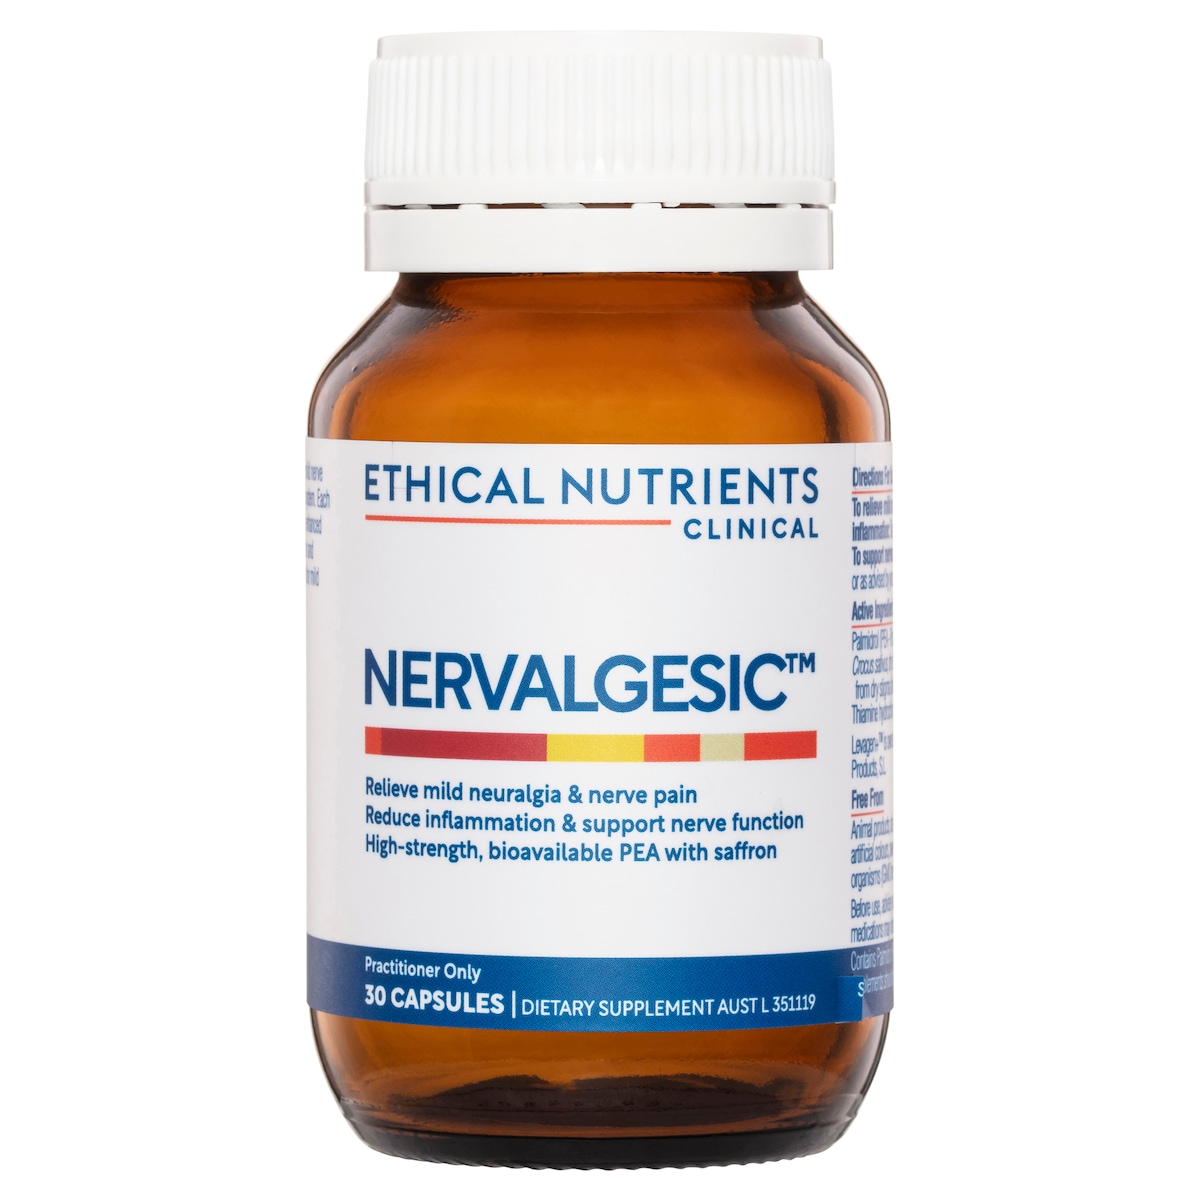 Ethical Nutrients Clinical Nervalgesic 30 Capsules